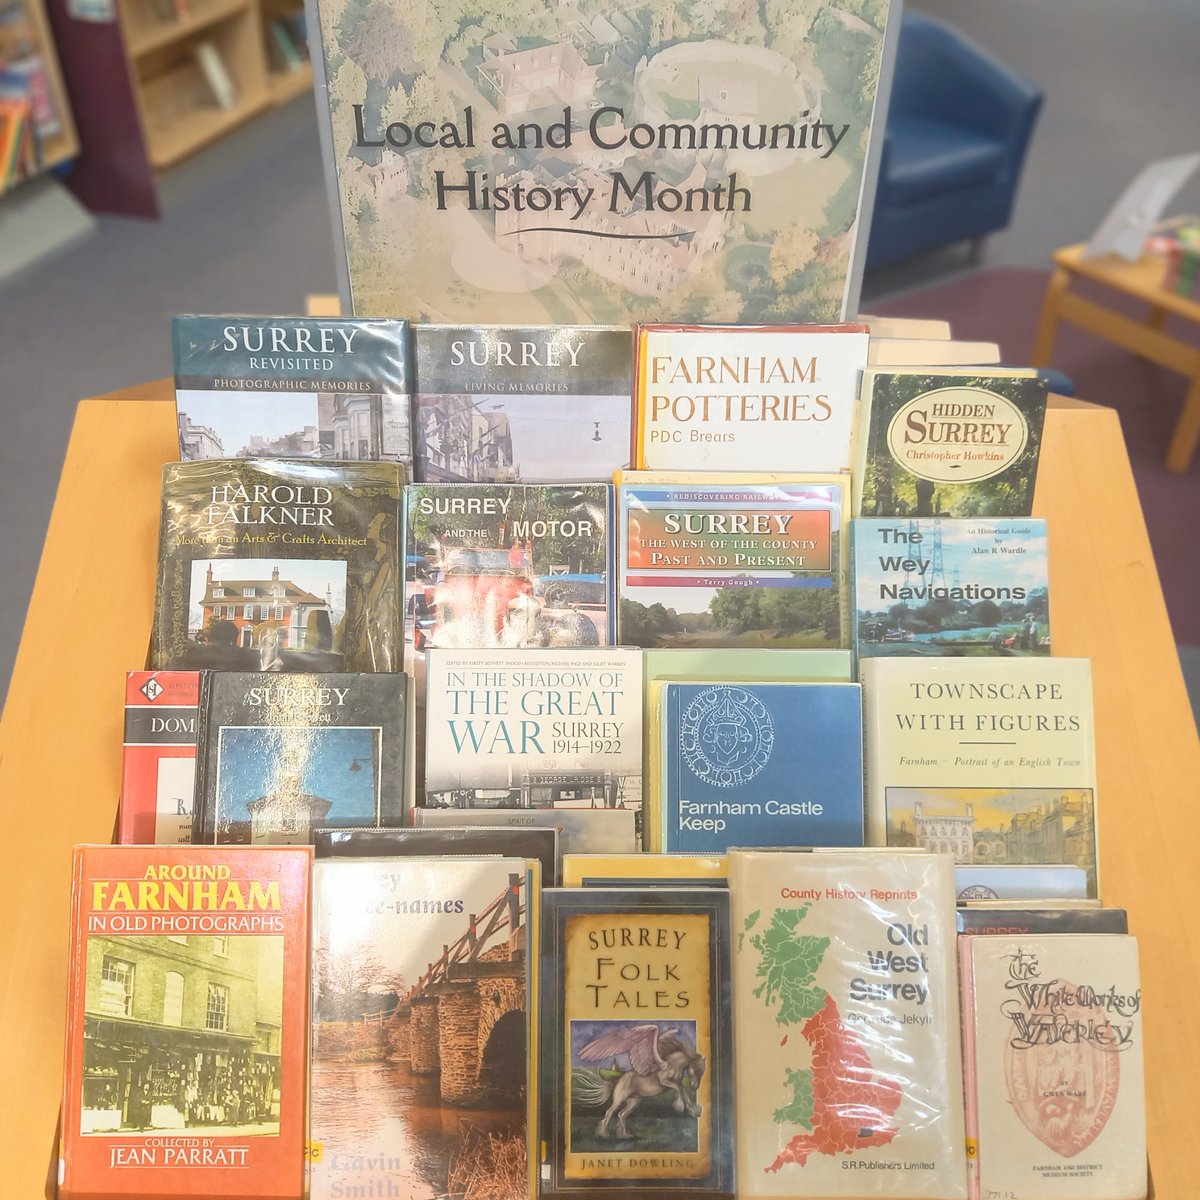 May is #LocalAndCommunityHistoryMonth and our display celebrates Farnham and Surrey's rich history Vernon House has its own fascinating history. It's home to a Tudor wall painting, and where Charles I slept on his way to trial 👑 Borrow a book to learn more local history facts!